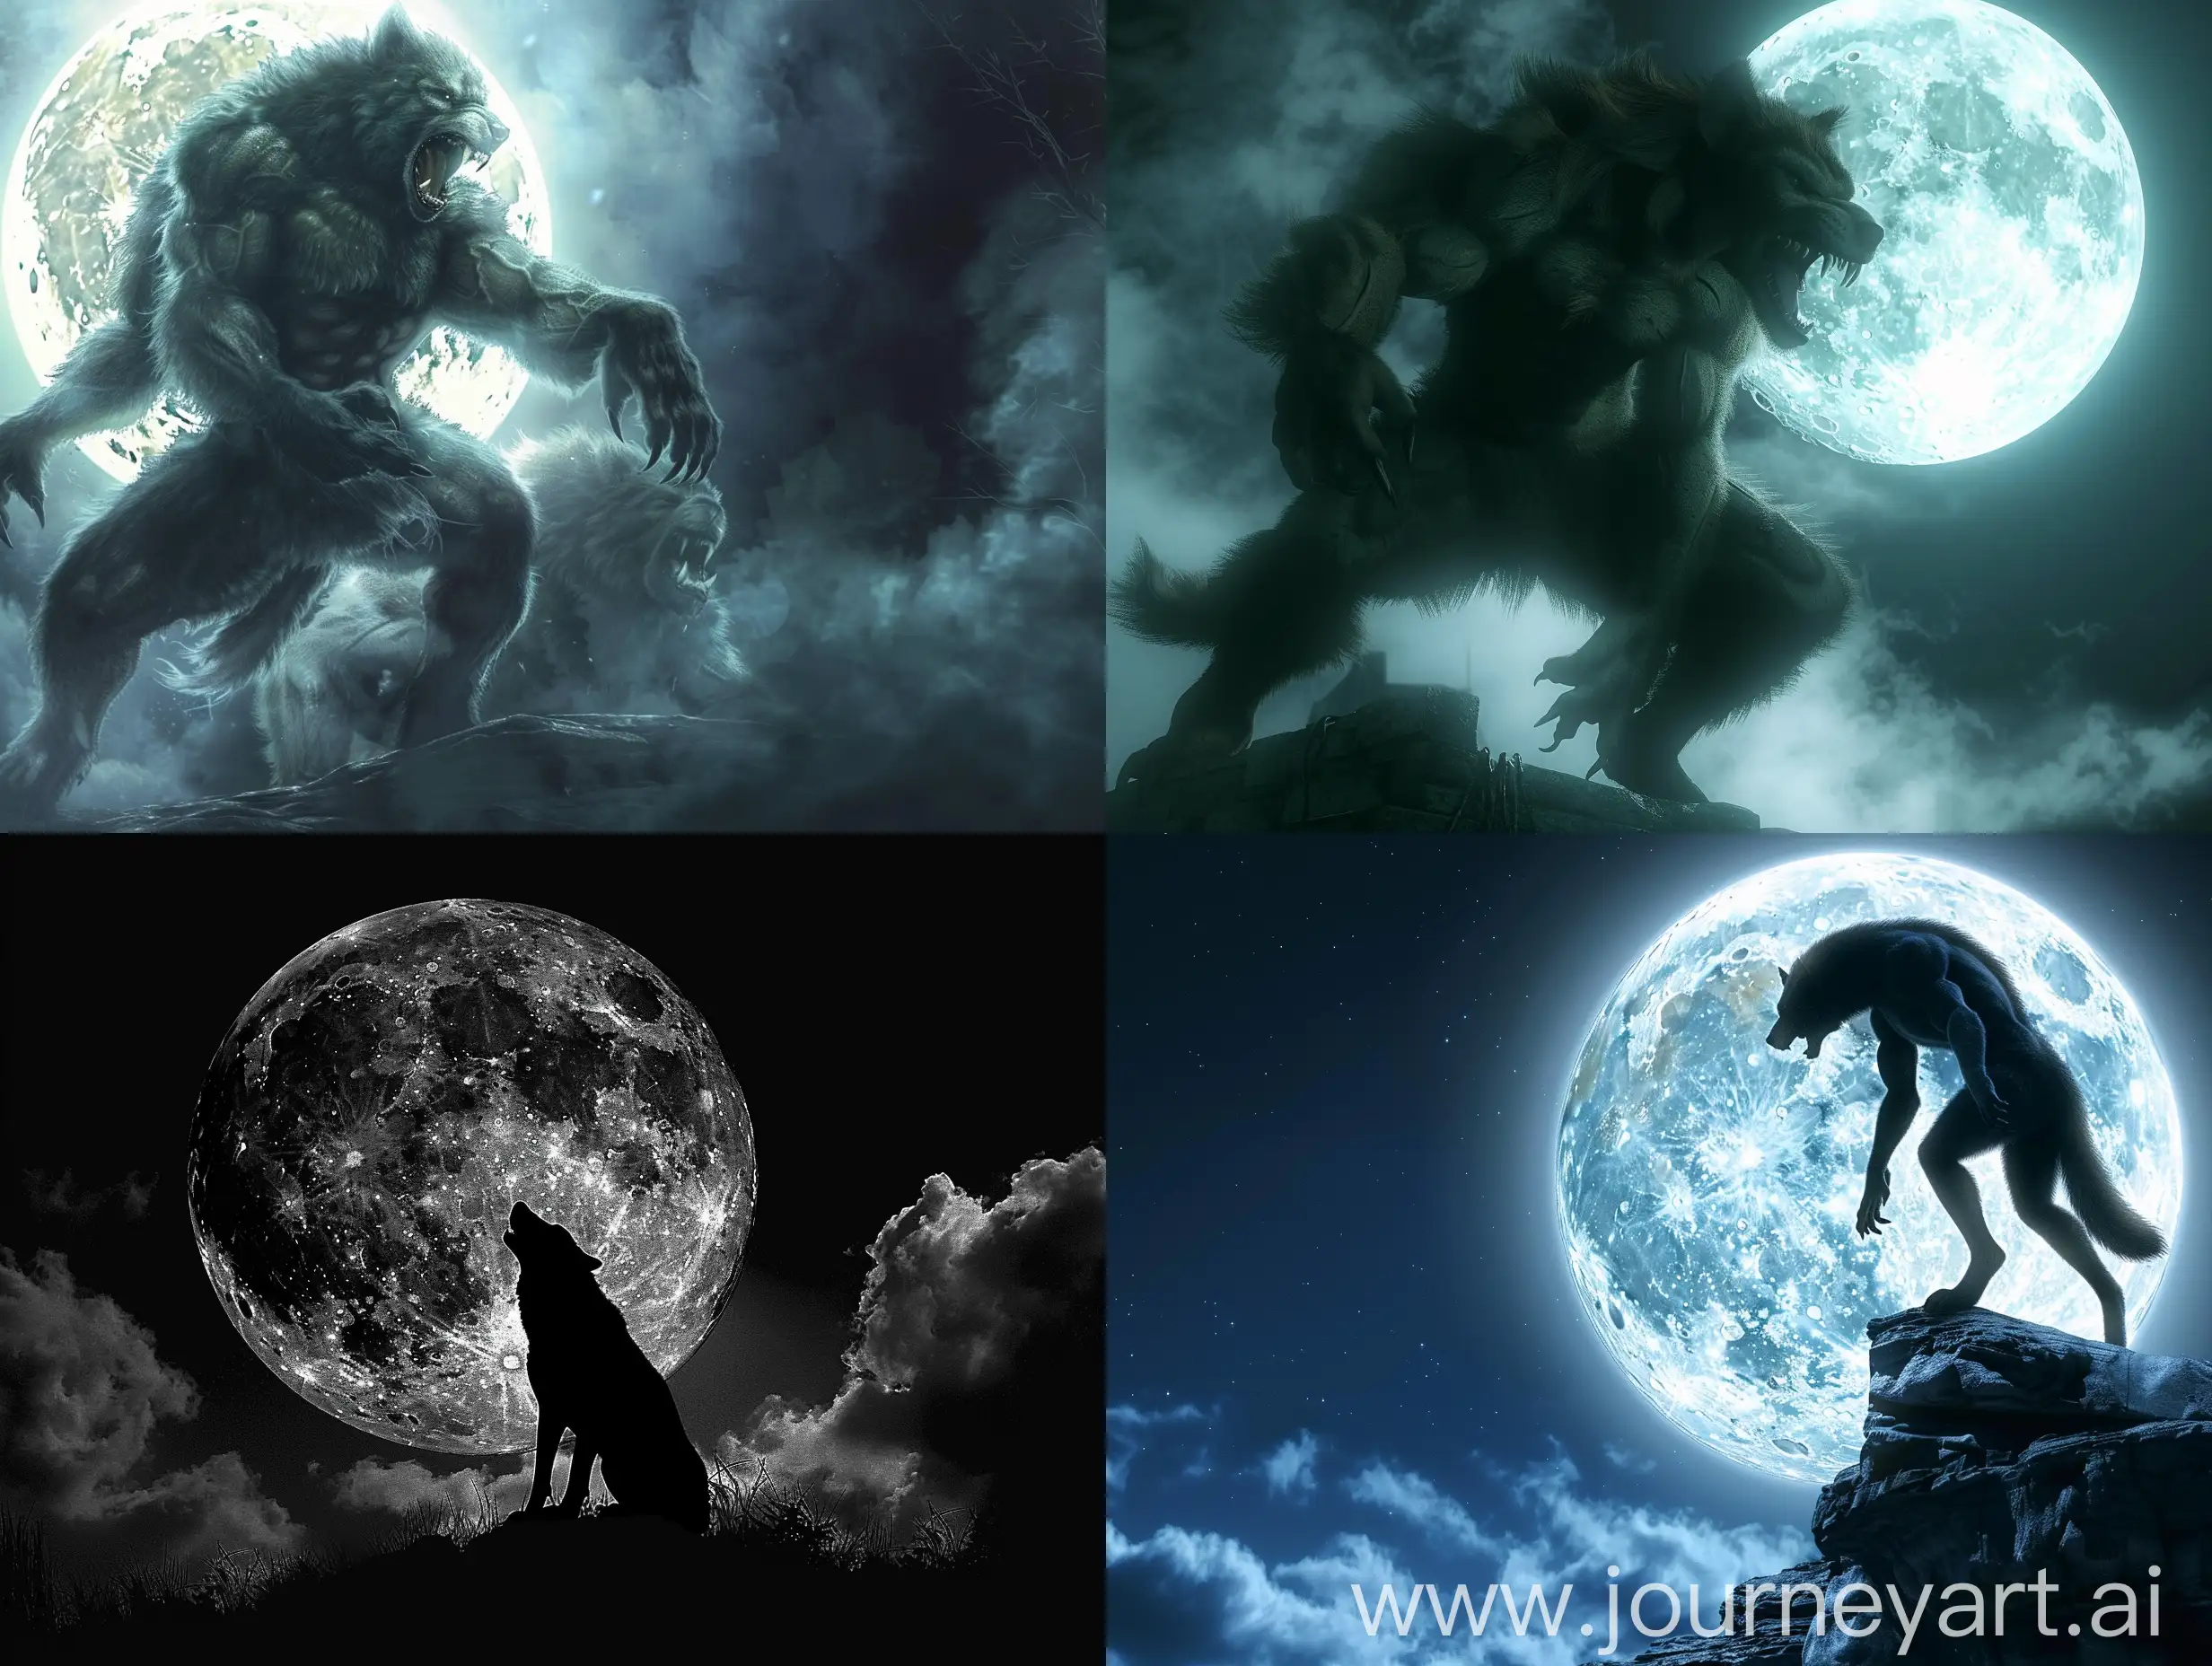 Could you generate an image that includes the element 'full moon' to represent the coming of werewolves?